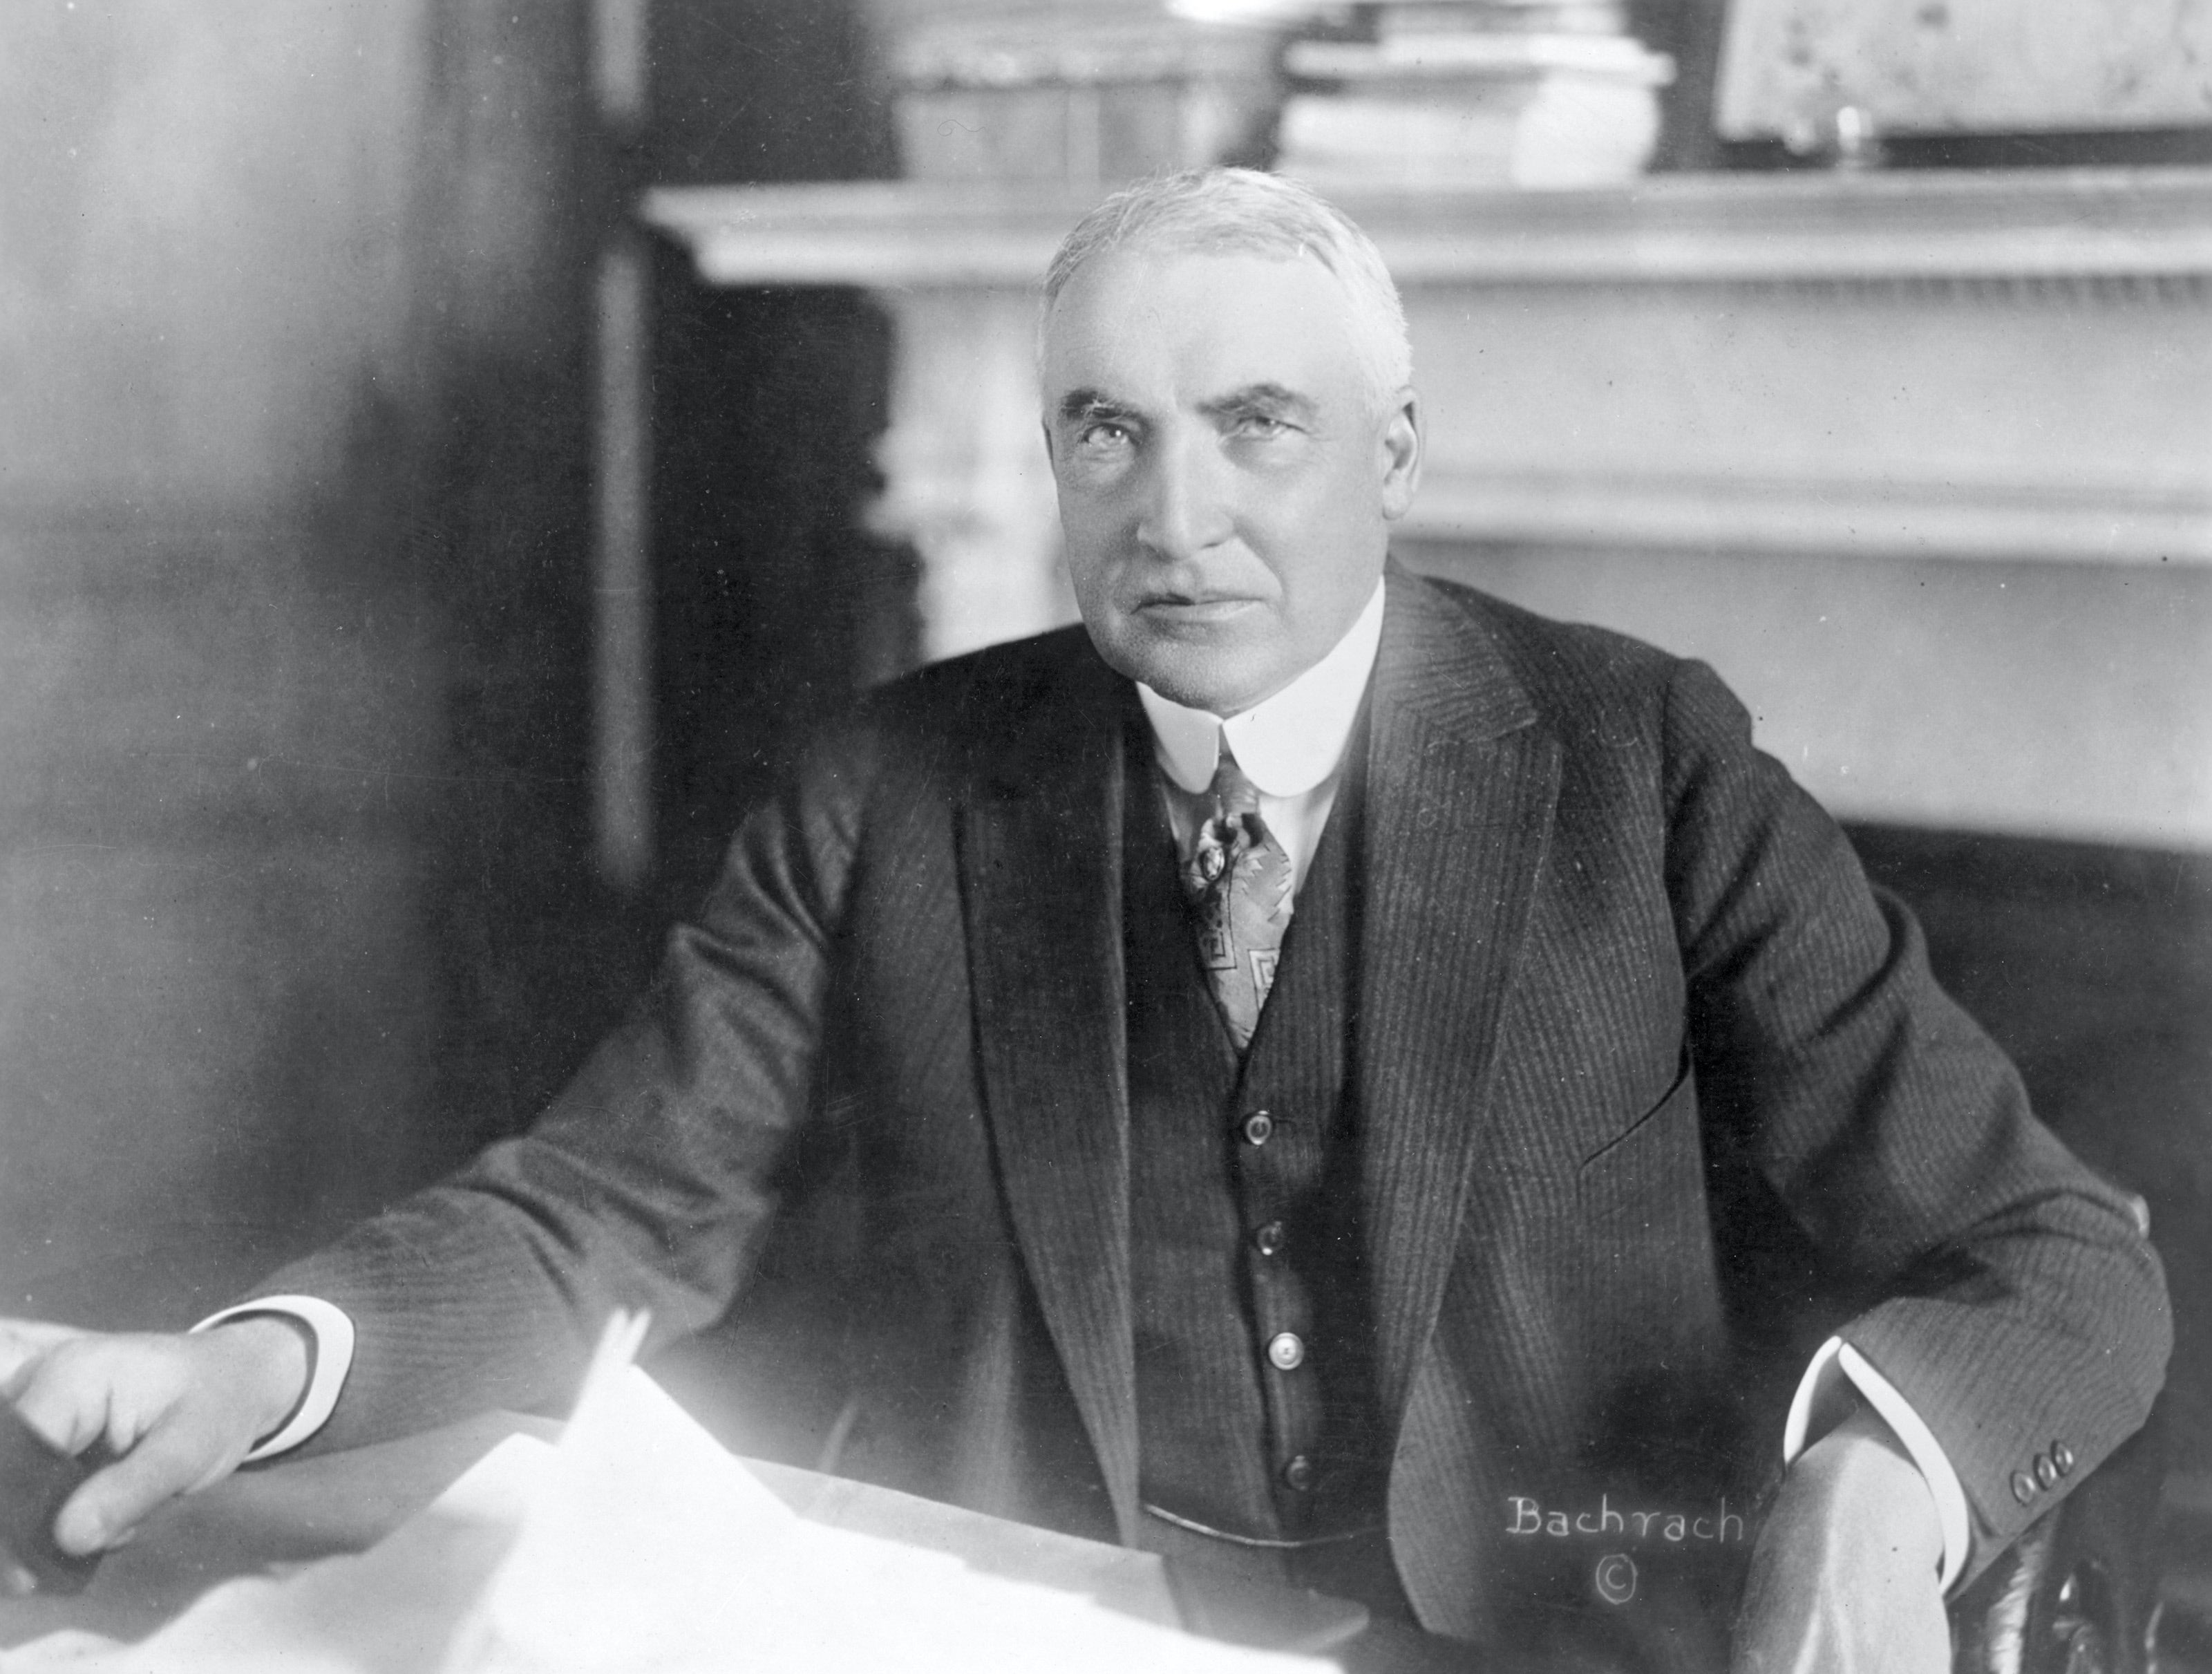 Harding held office for two-and-a-half years before dying at the age of 57